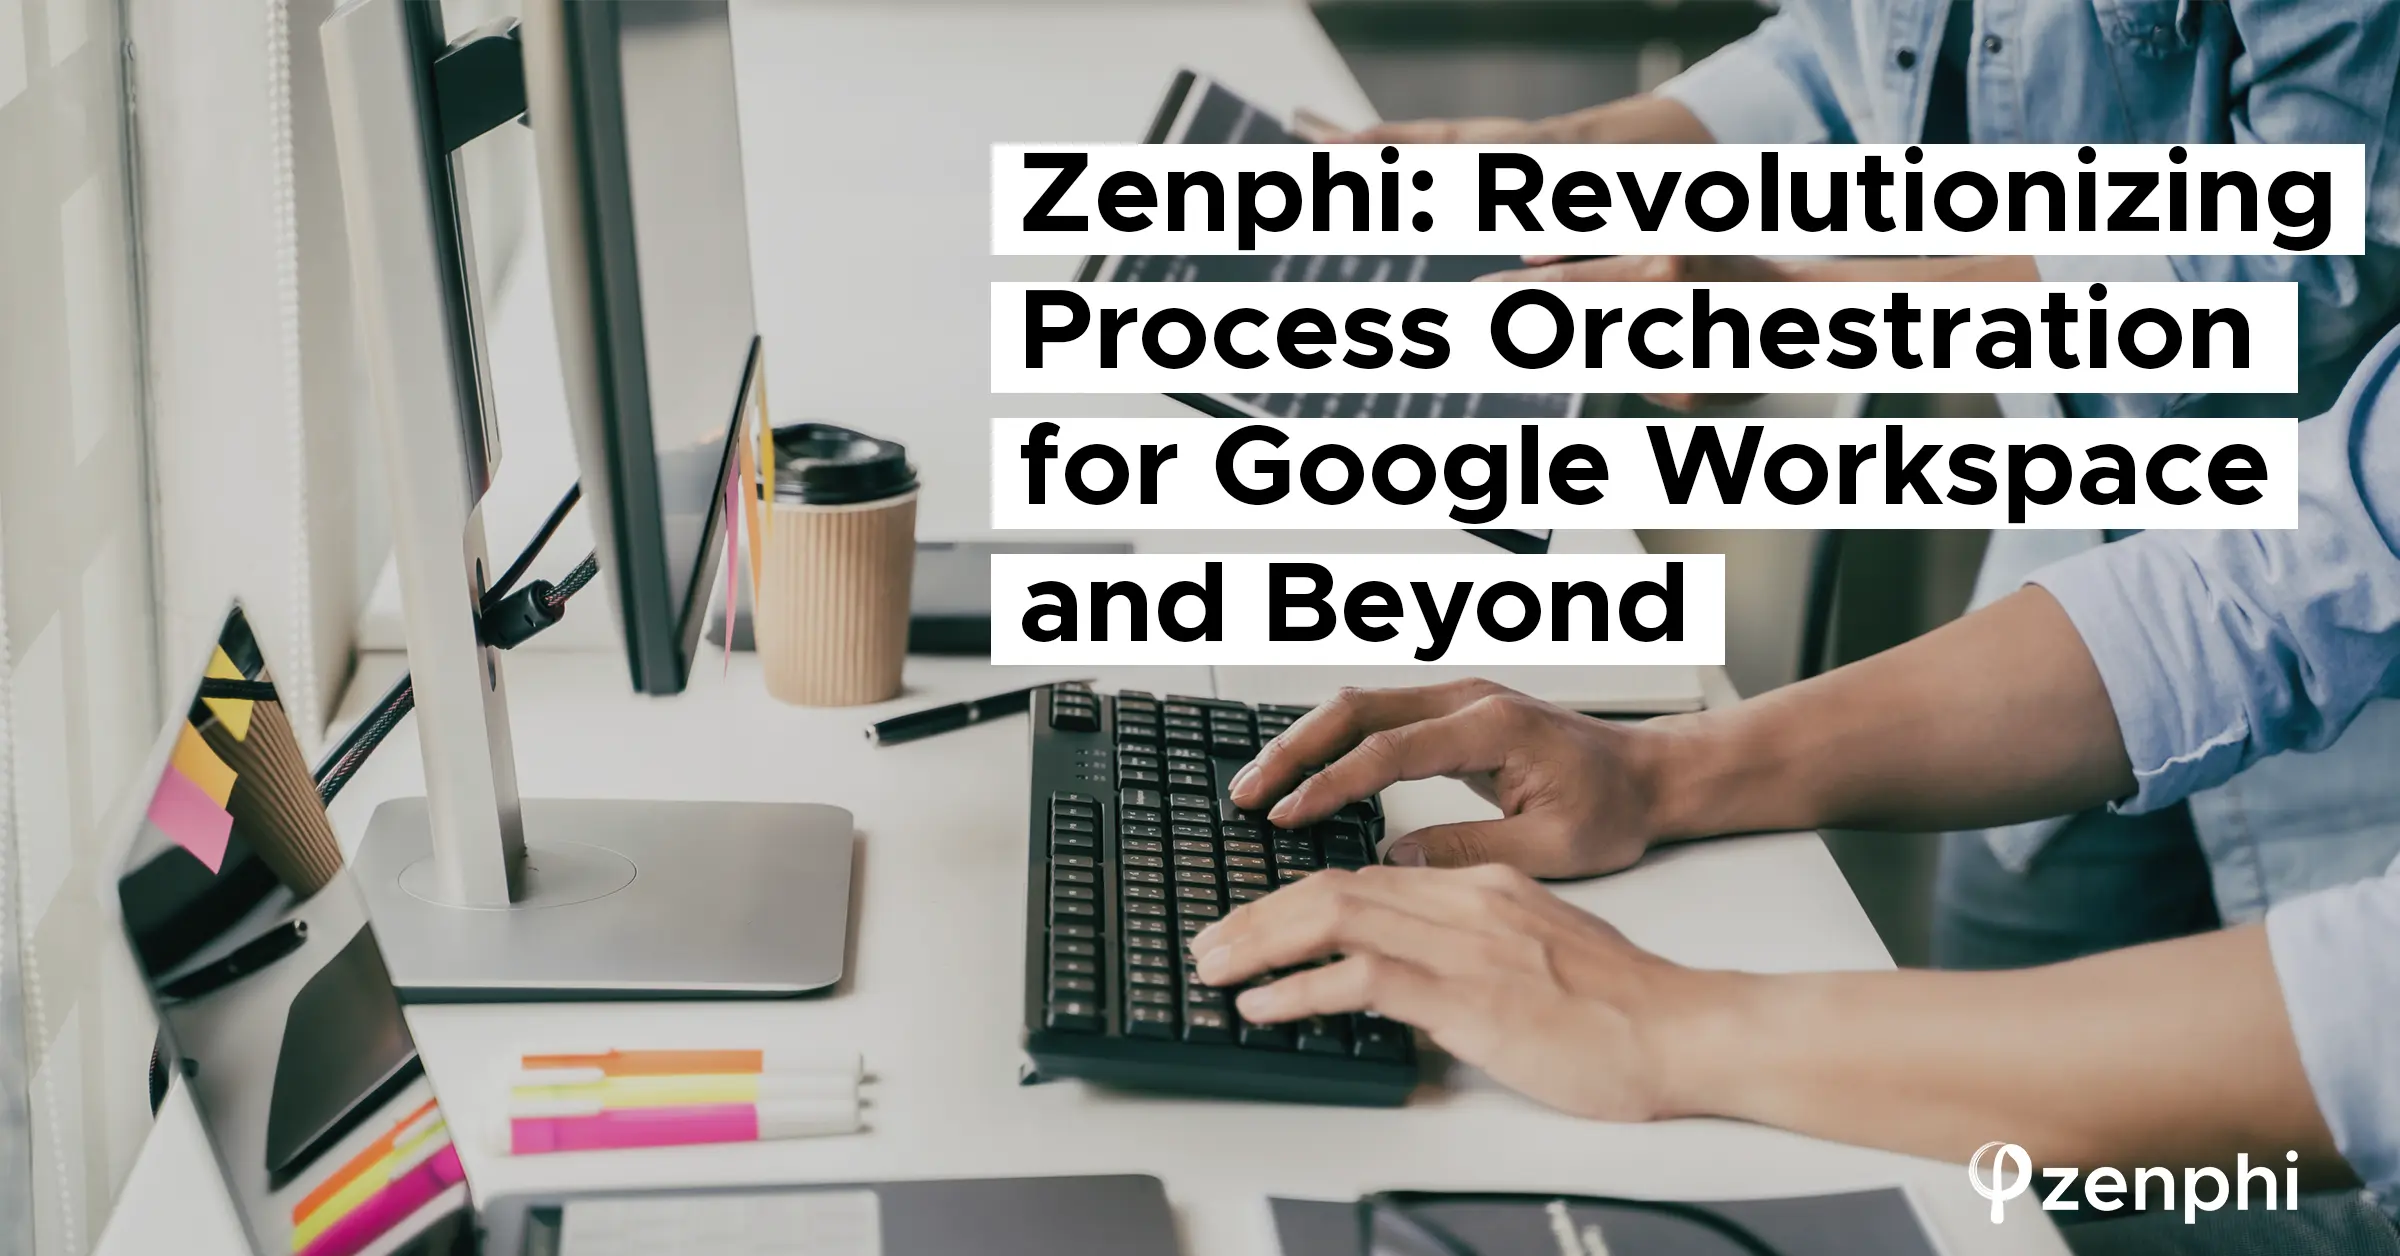 Revolutionizing Process Orchestration for Google Workspace and Beyond